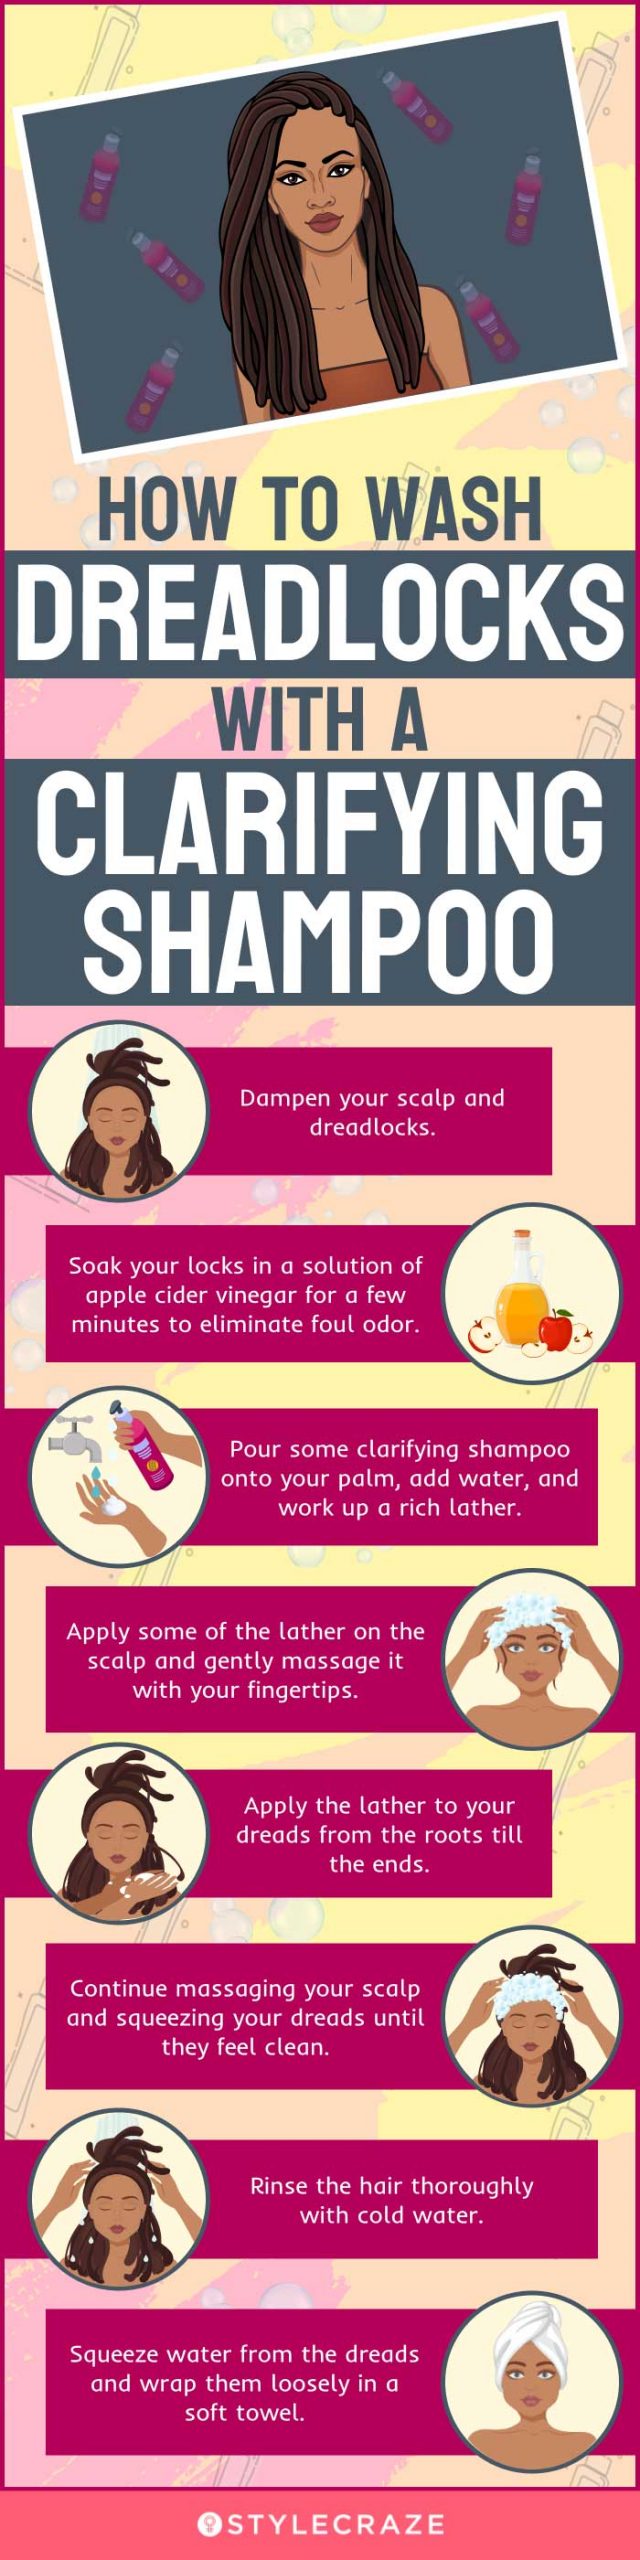 How To Wash Dreadlocks With A Clarifying Shampoo (infographic)